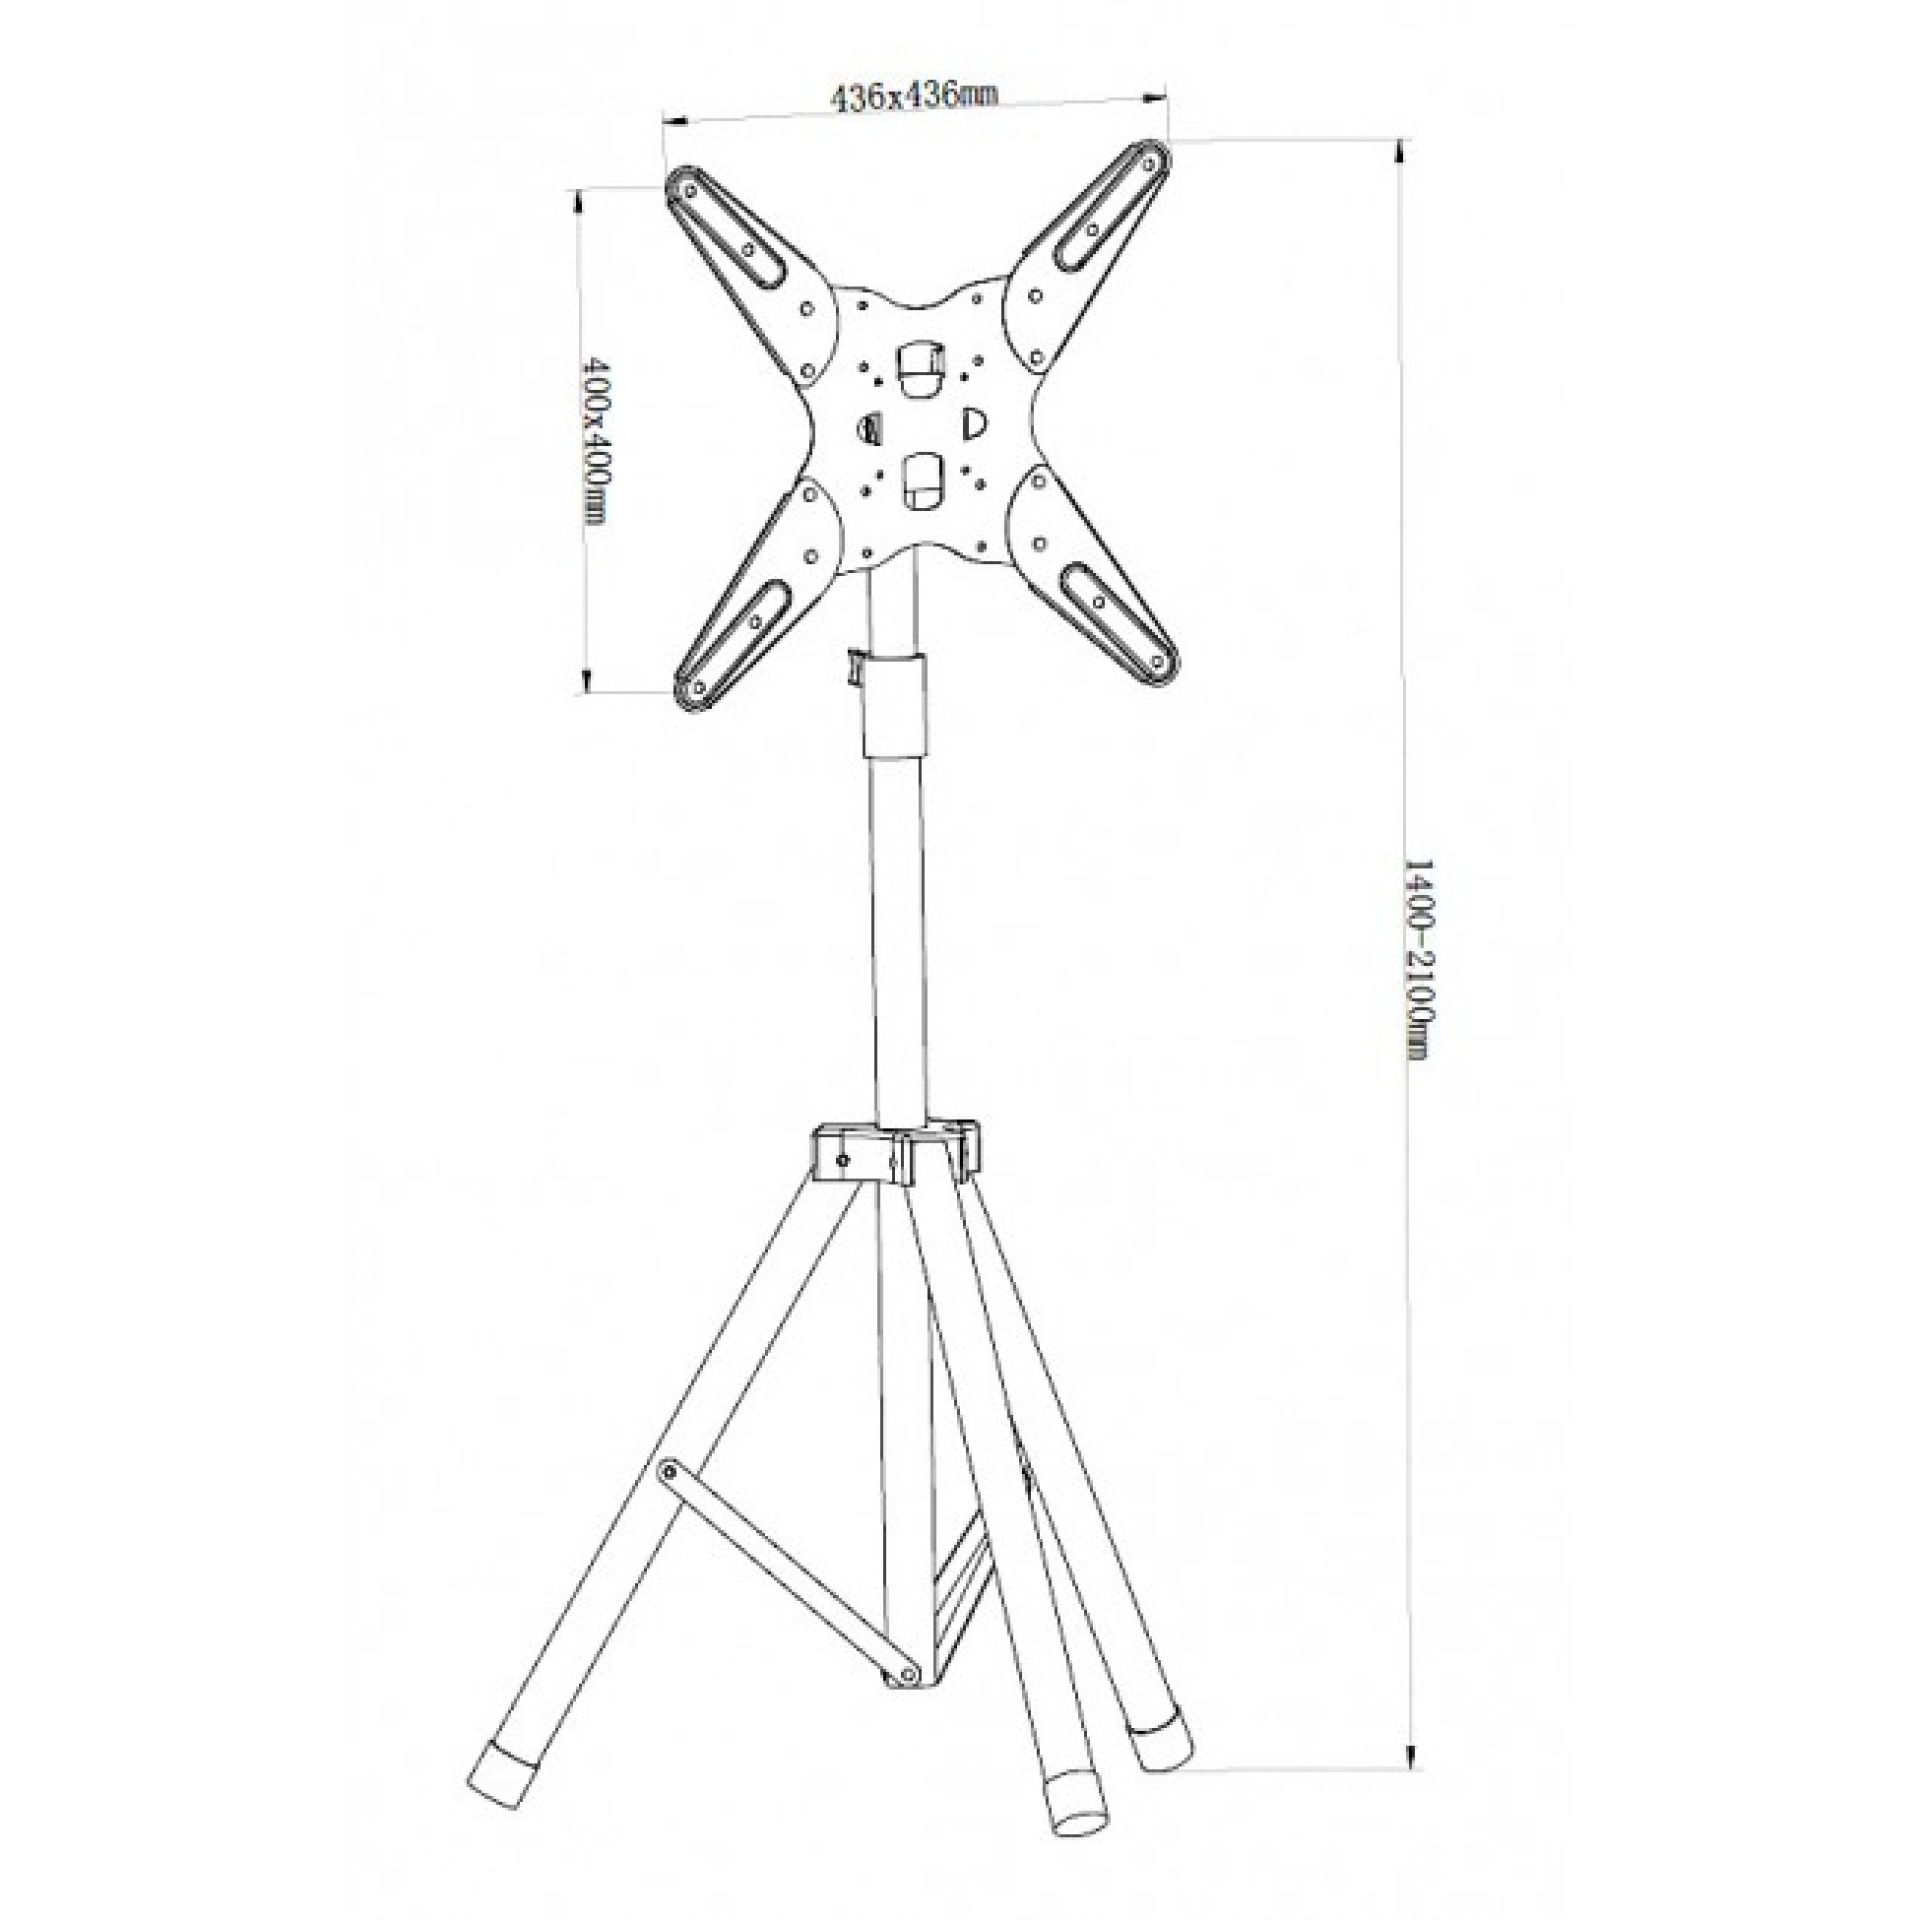 Universal Floor Tripod Stand for 17-60" TV, portable, max. 1900mm